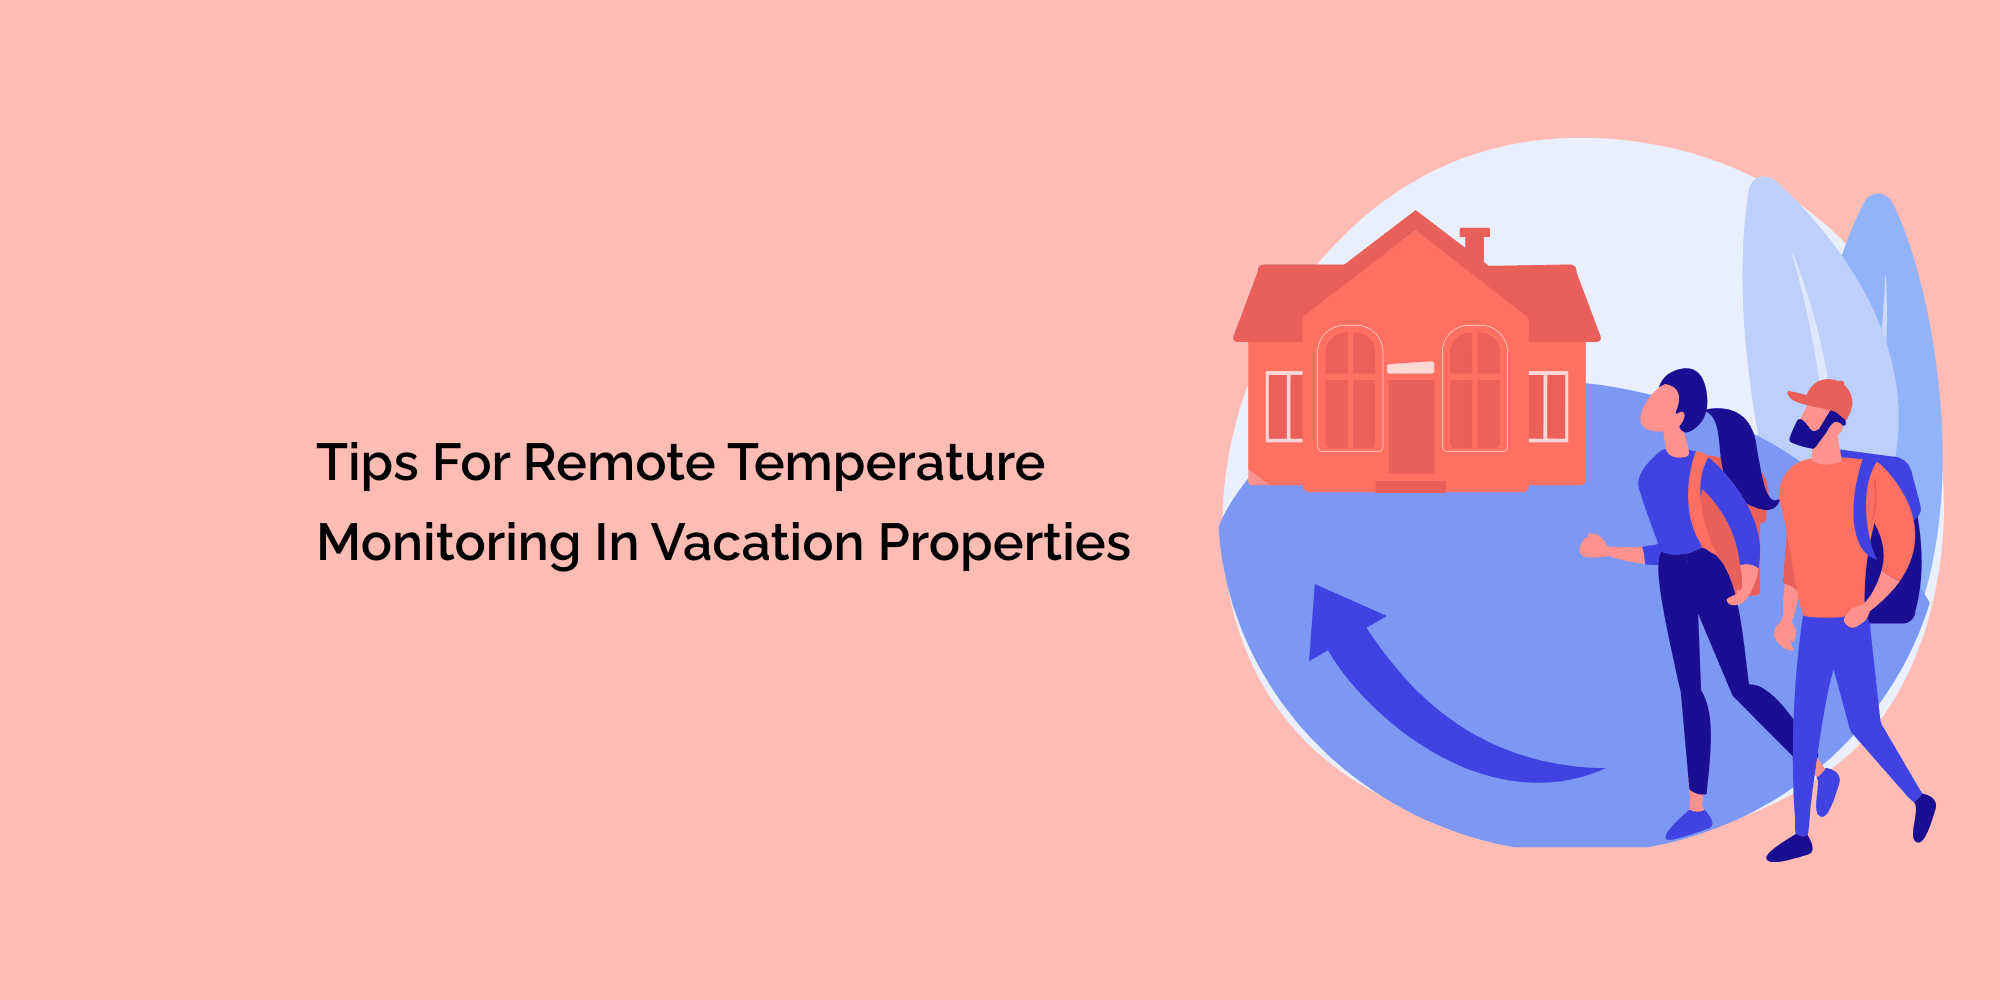 Tips for Remote Temperature Monitoring in Vacation Properties